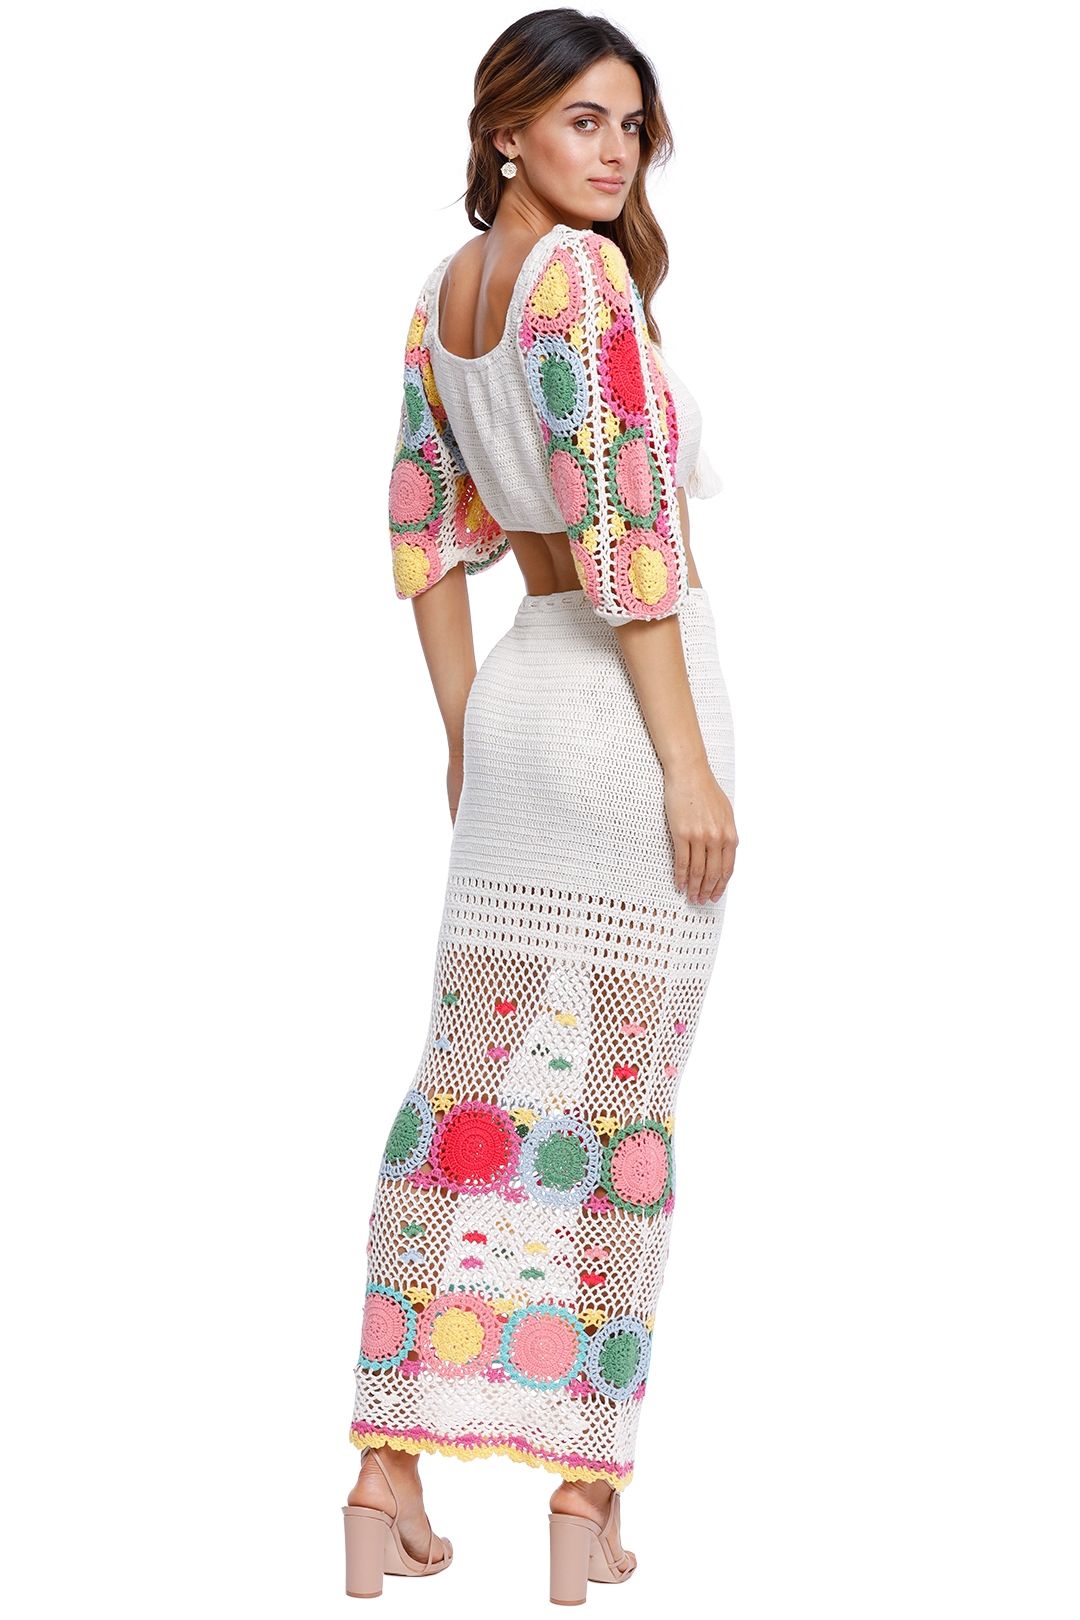 Let the Sunshine in Crochet Top and Skirt Set maxi